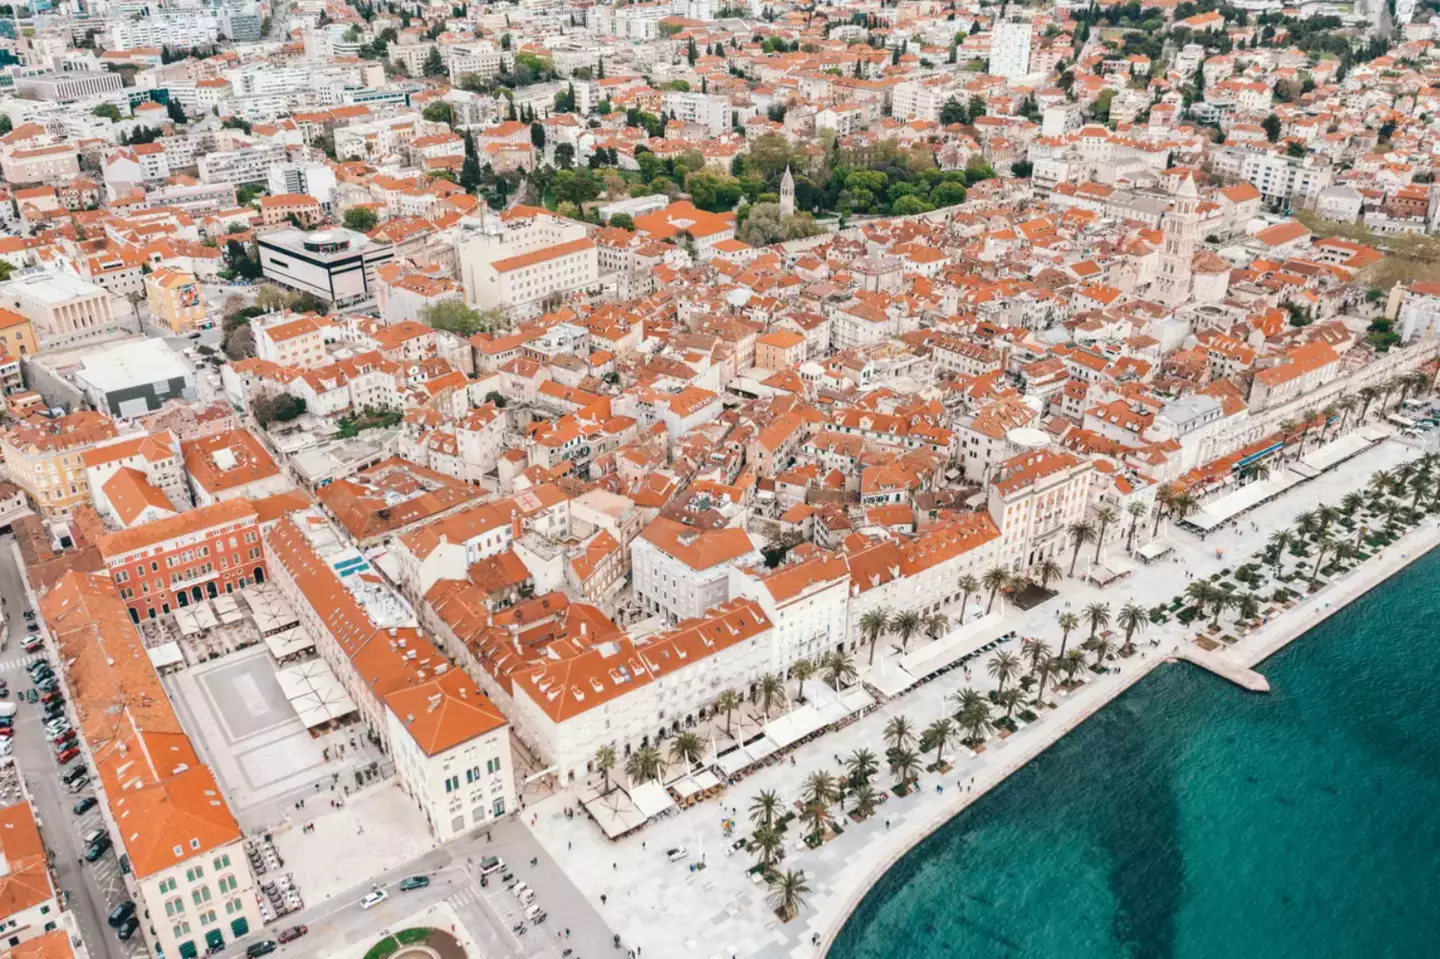 UK tourists heading to Croatia should be wary of the new rules.